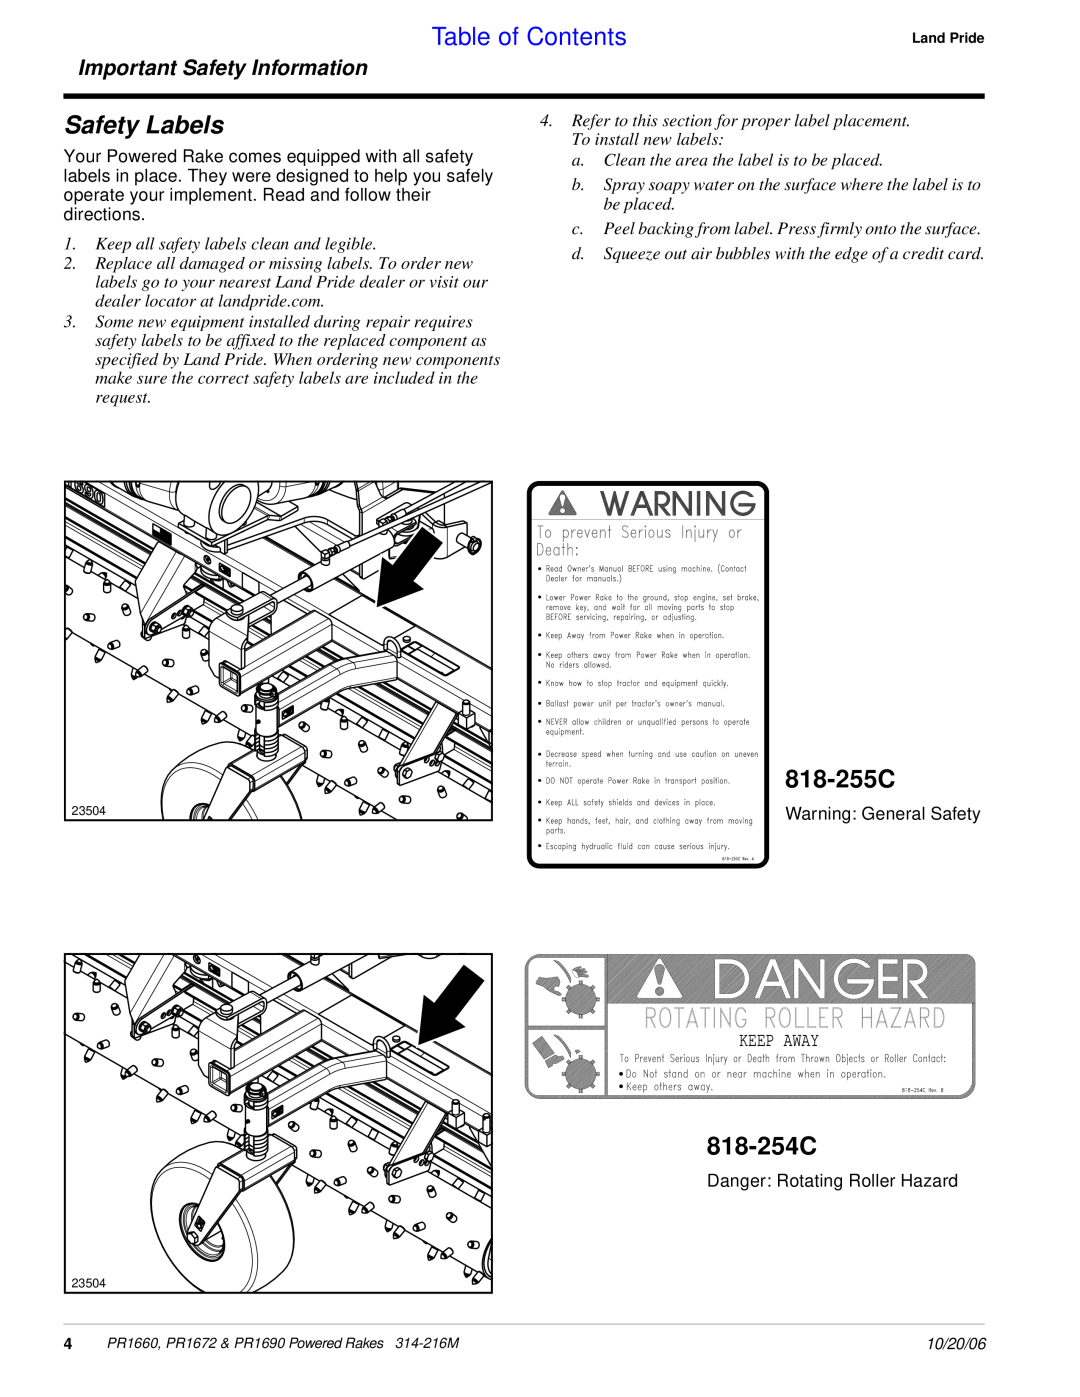 Land Pride PR1672 manual Safety Labels, 818-255C, 818-254C, Table of Contents, Important Safety Information, Keep Away 